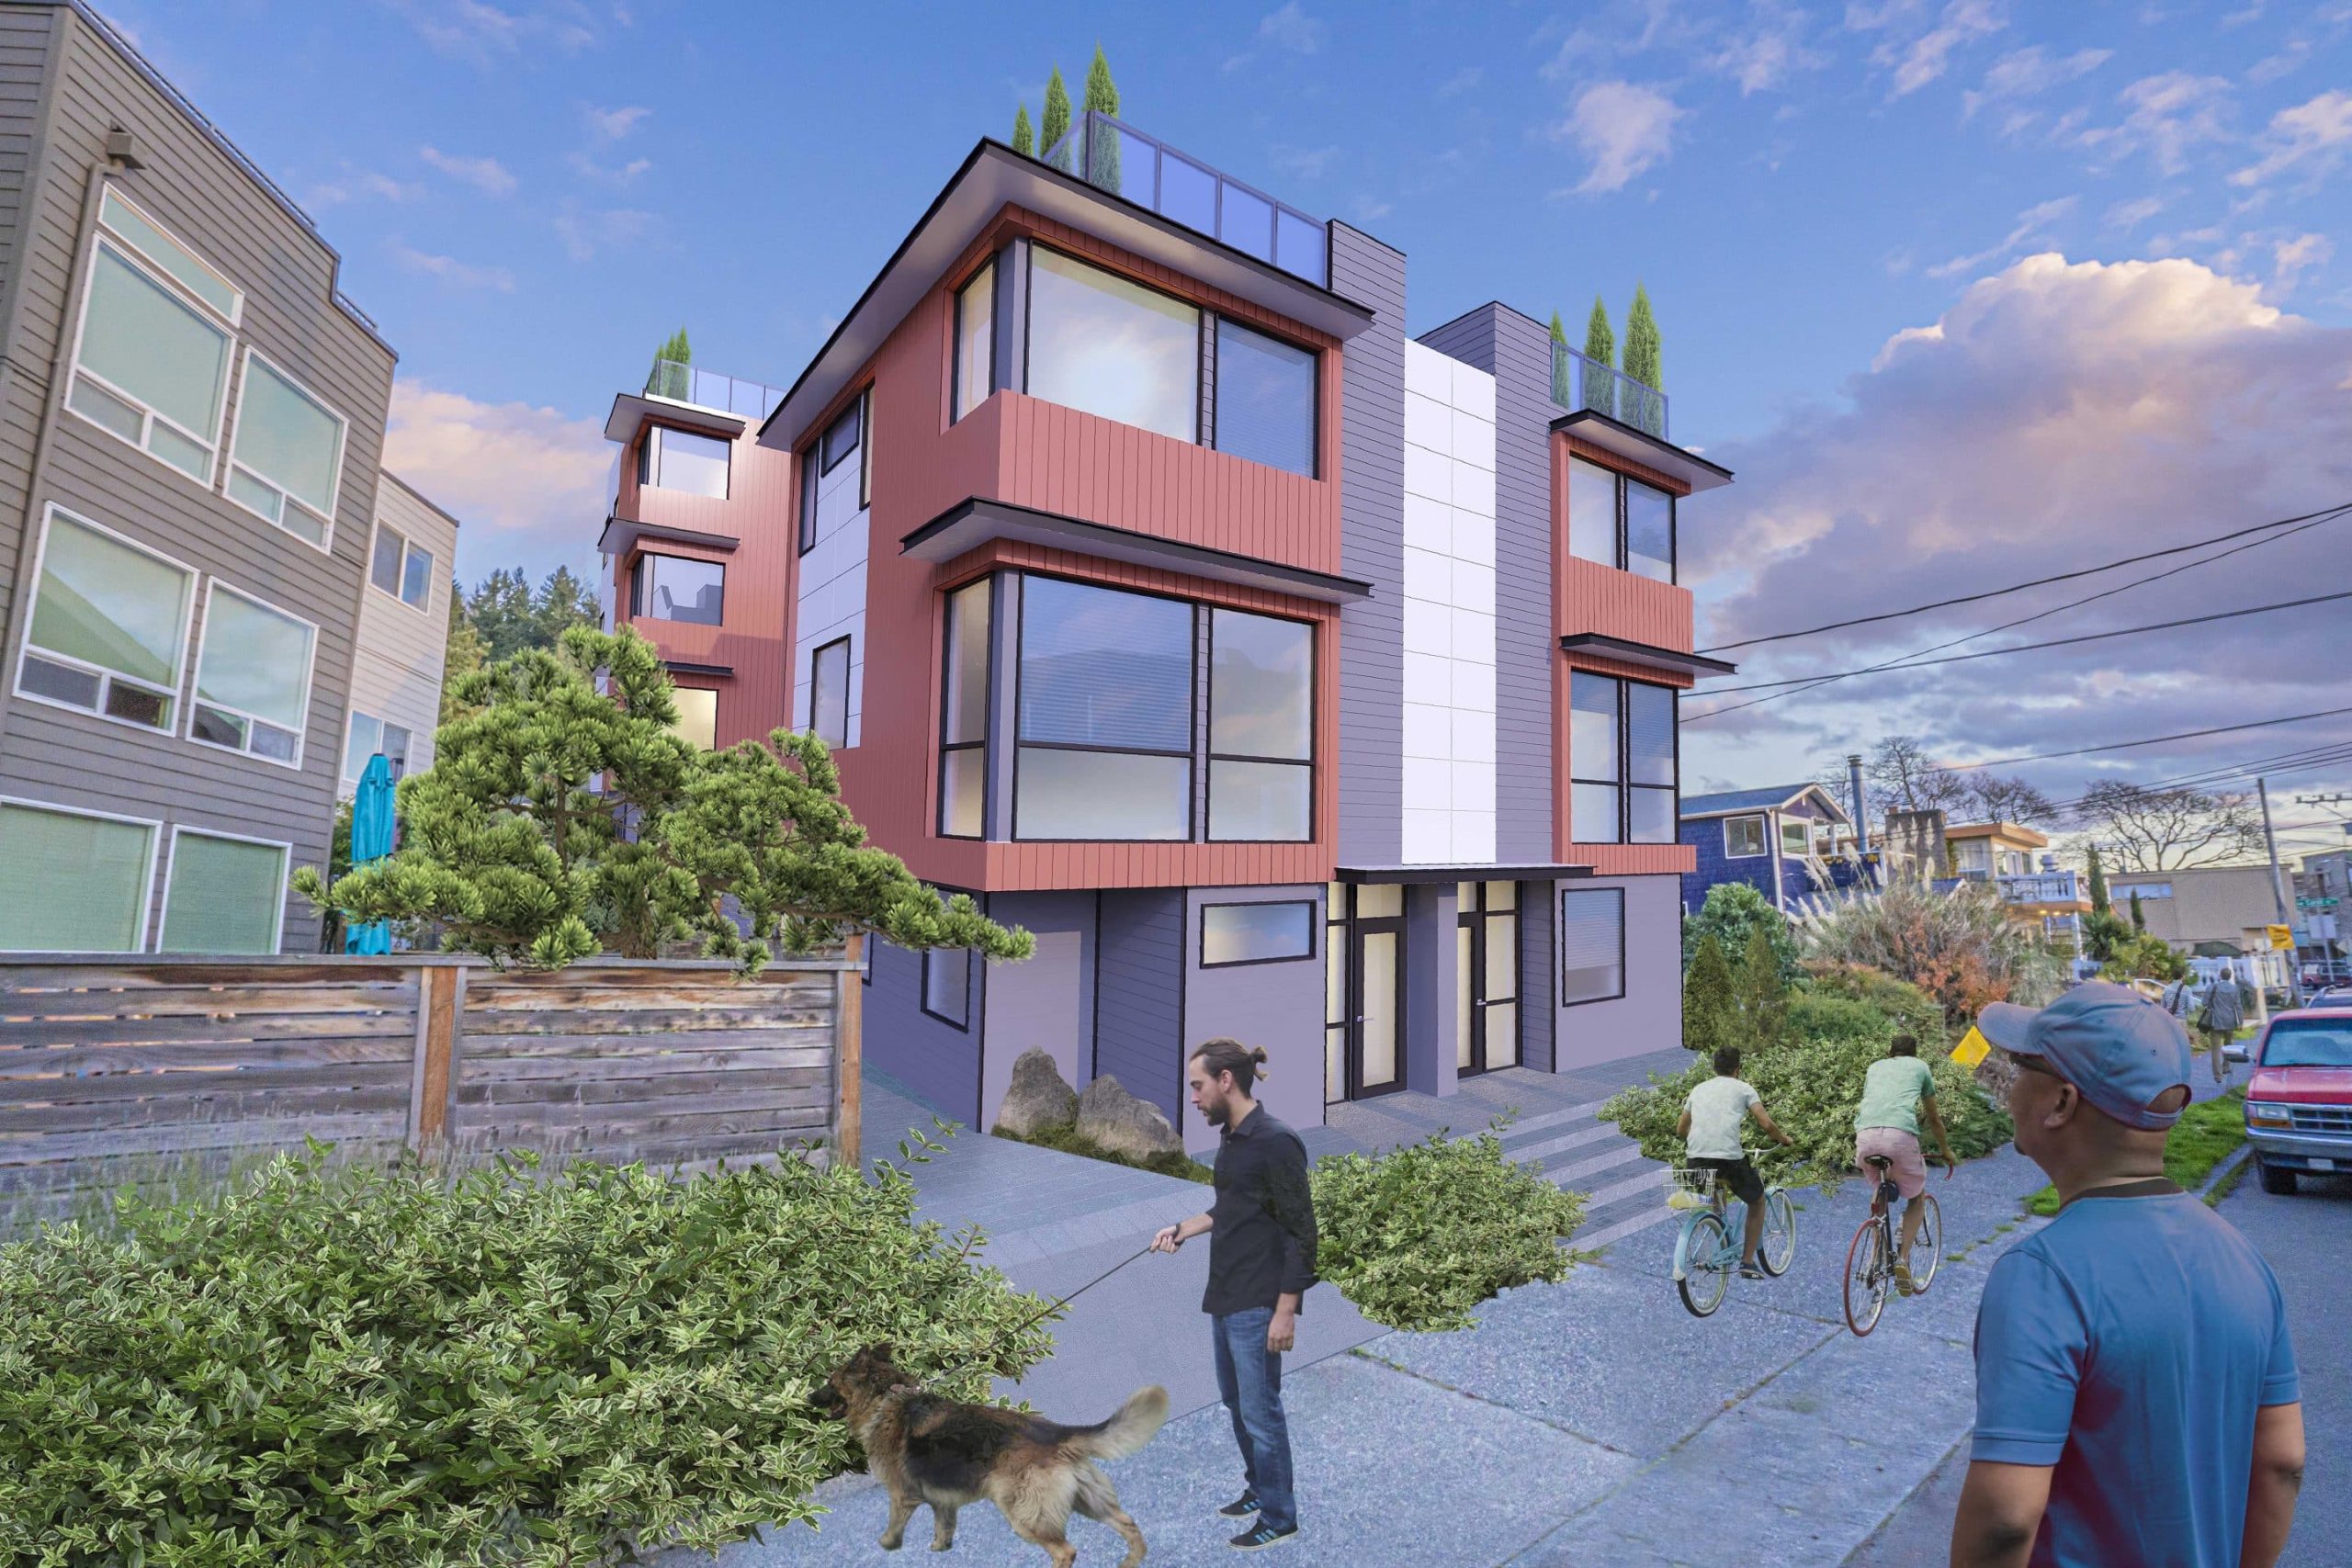 Unit 820 B Exterior of a Diana DADU floor-plan located at 820 S Rose Street Seattle, WA 98108